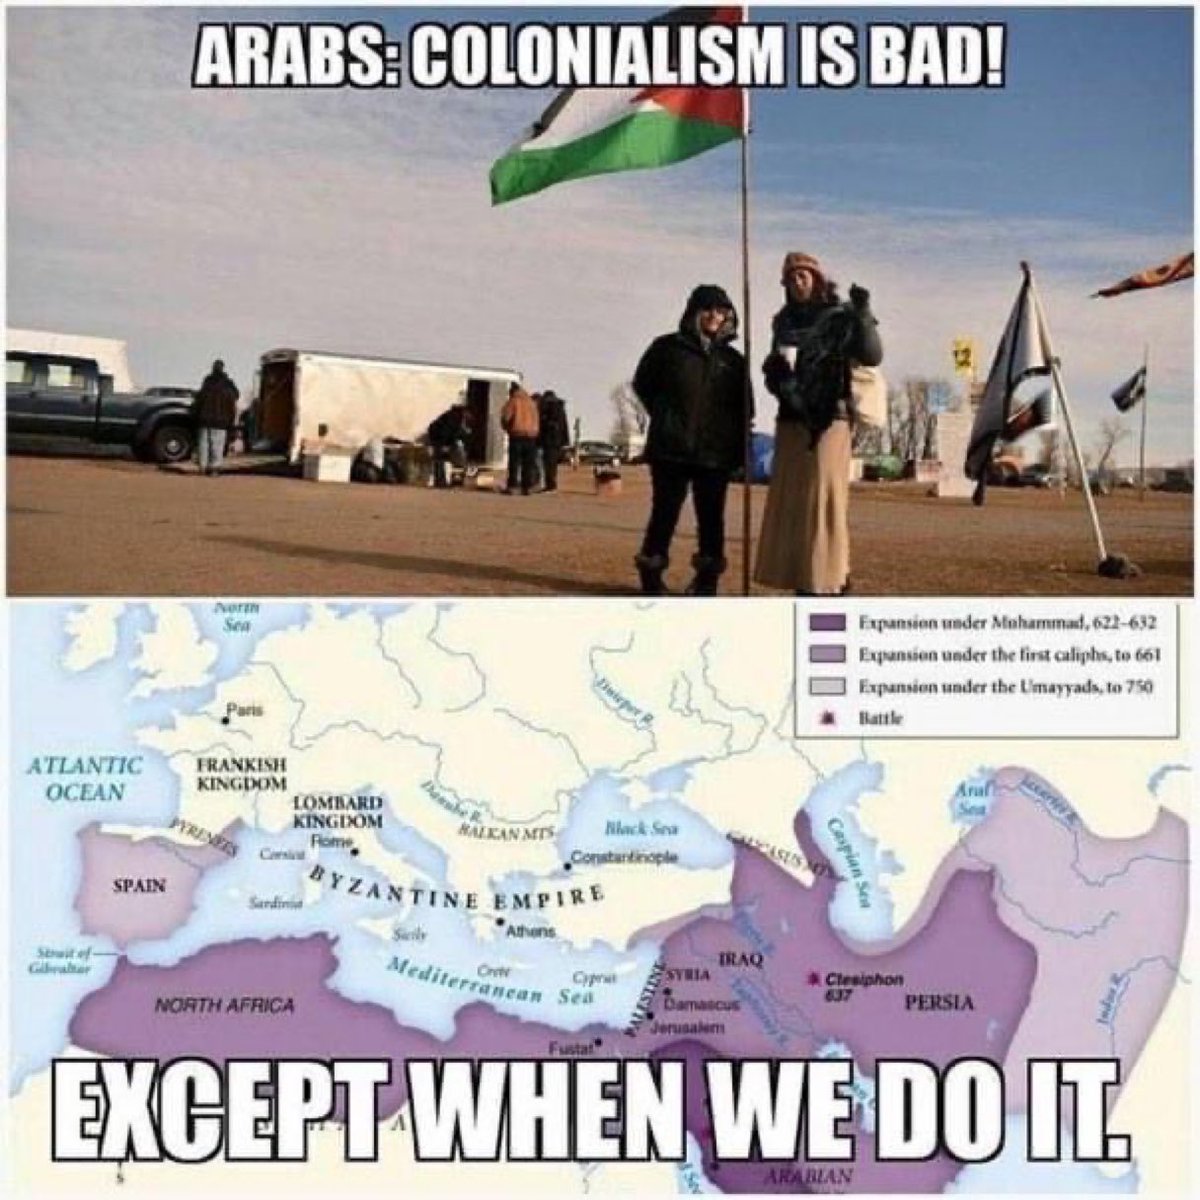 Arabs: Colonialism is bad, except when we do it.